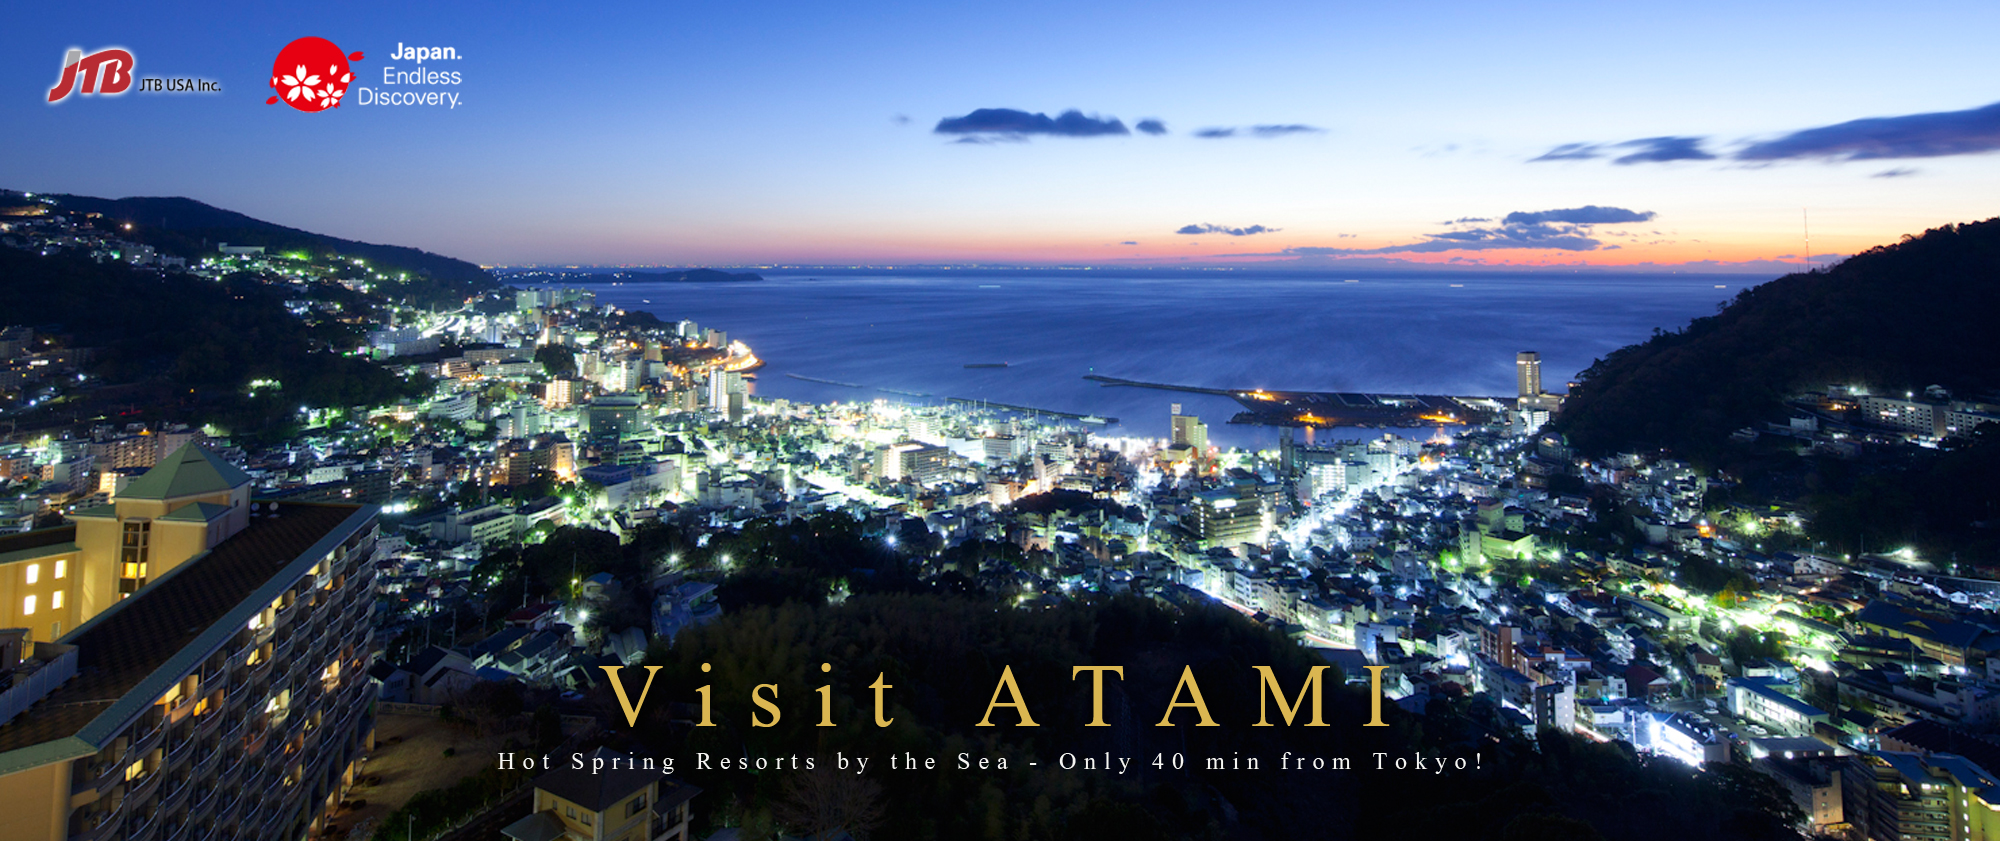 Welcome to Atami